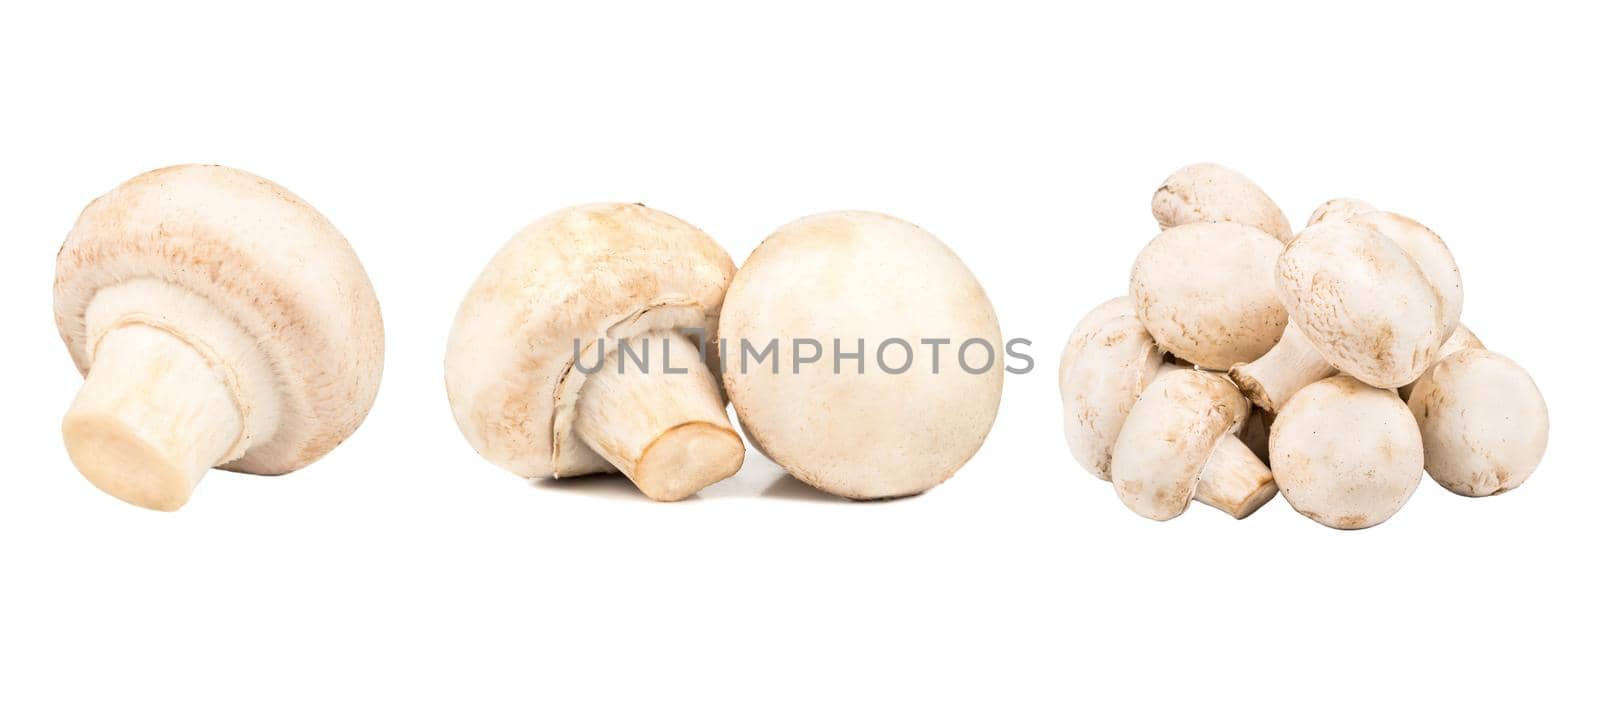 Set of fresh whole and sliced champignon mushrooms isolated on white background. Top view.